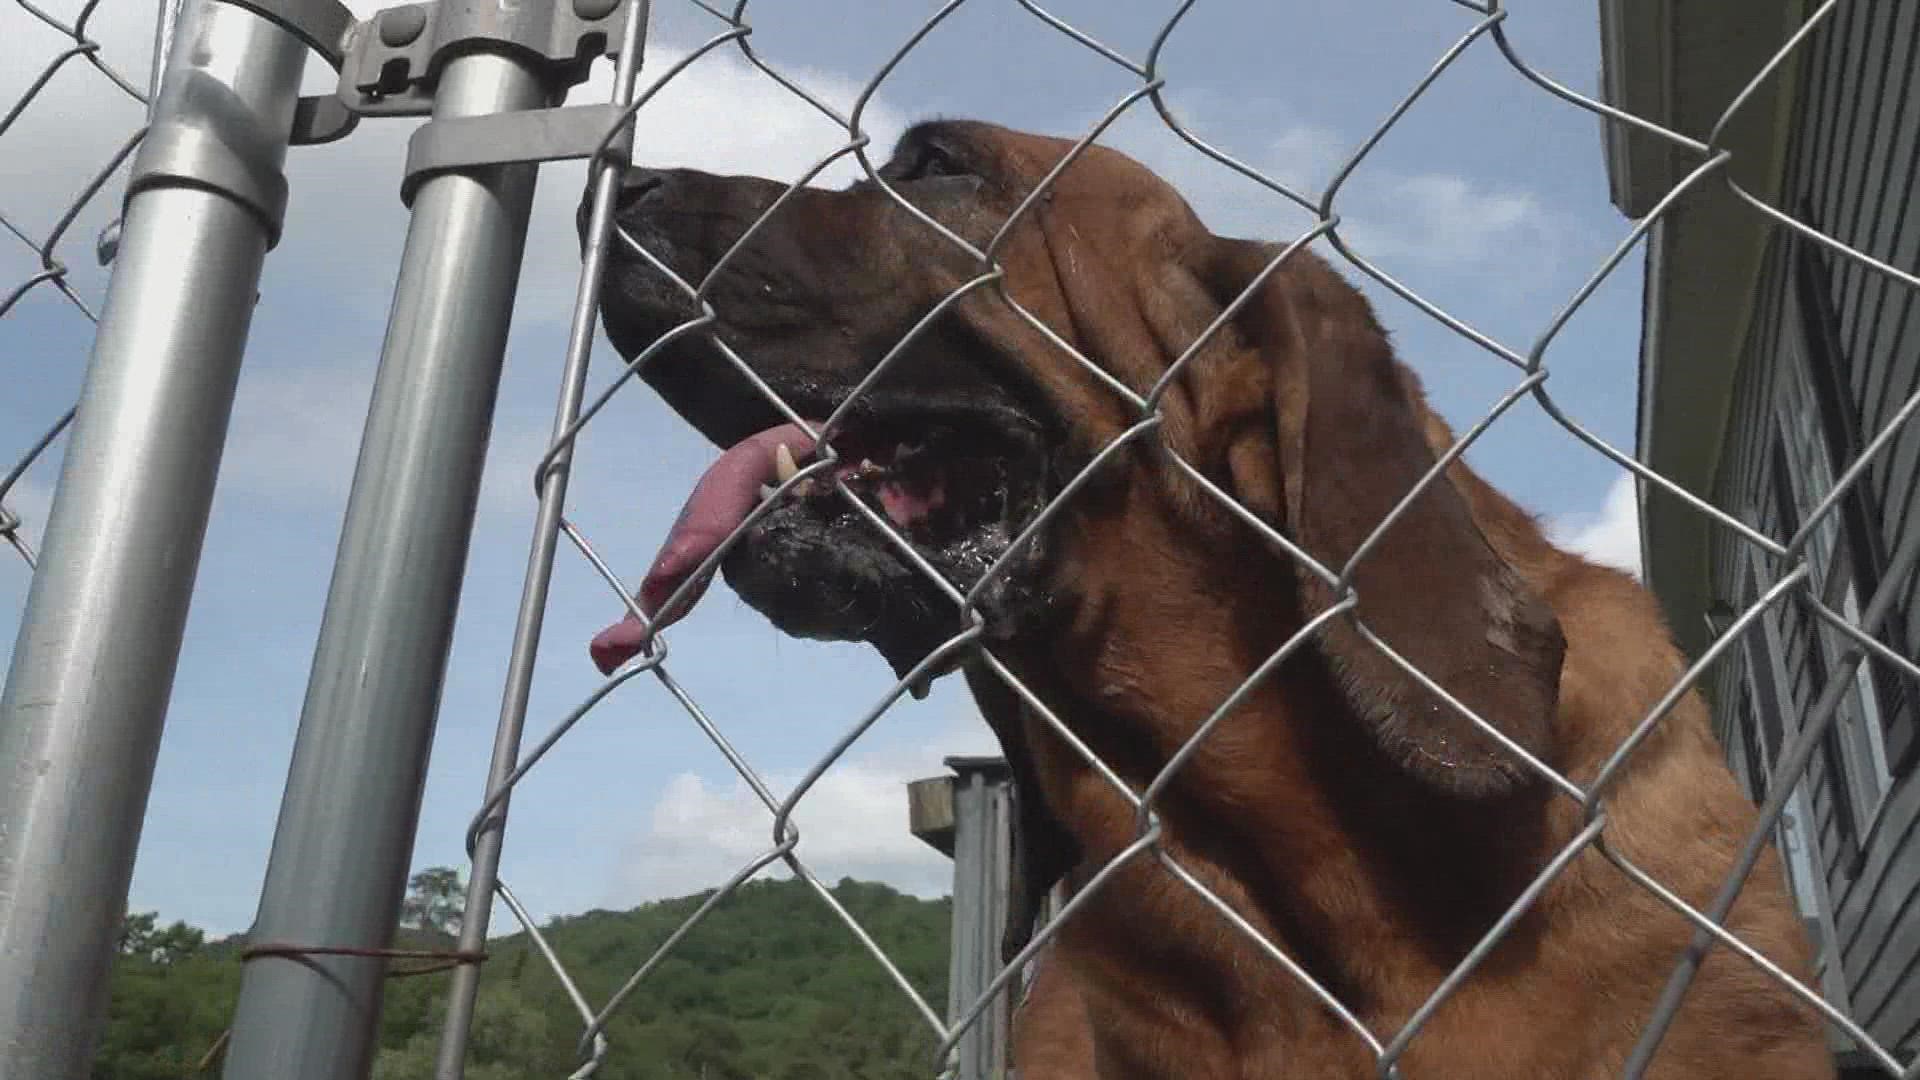 East Tennessee Bloodhound Rescue is currently home to 20 dogs and has been in operation for 20 years.